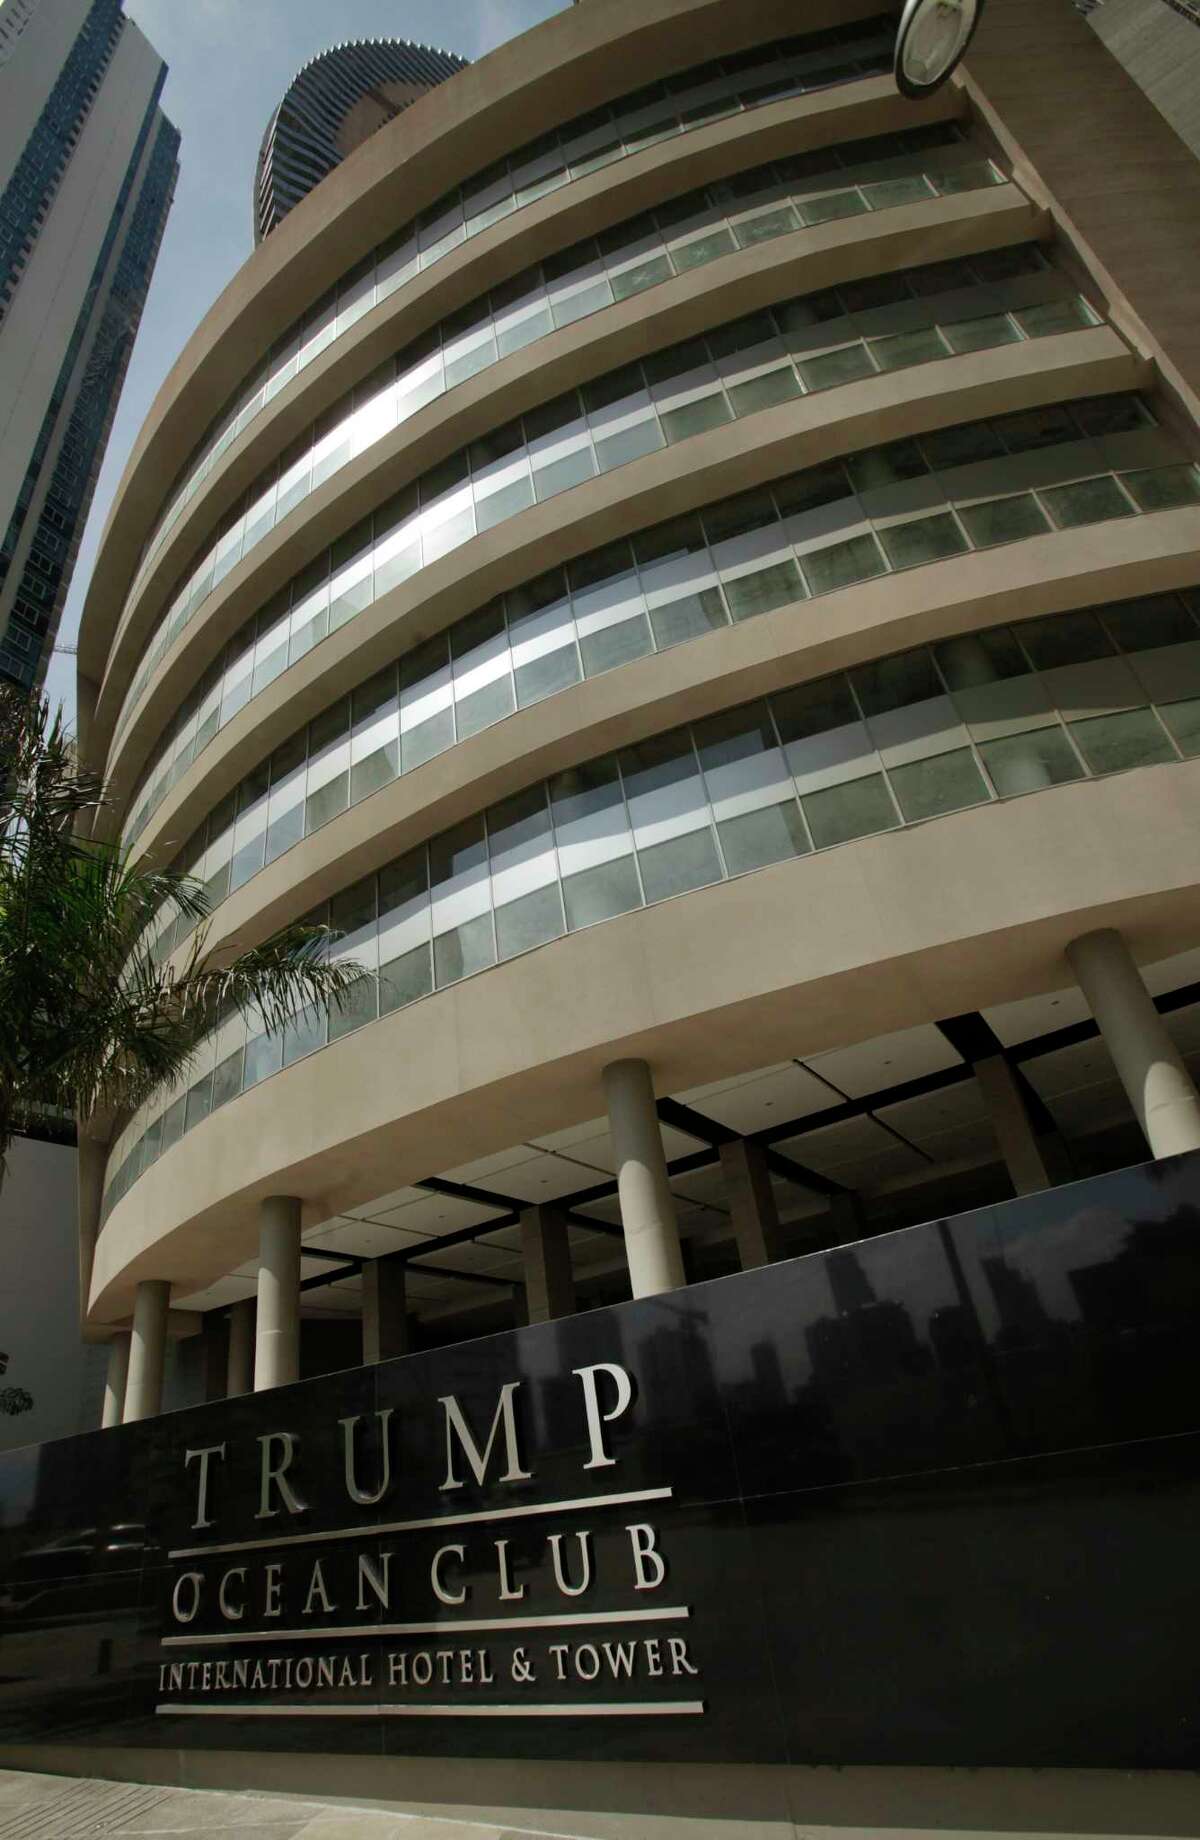 This July 4, 2011 photo shows the main entrance to the Trump Ocean Club International Hotel and Tower in Panama City, Panama. The tale of the 70-story waterfront tower along Panama Bay that was managed by the Trump empire offers insight into the Republican presidential candidate’s business traits, and hints about the management style that might be expected from a Trump White House.